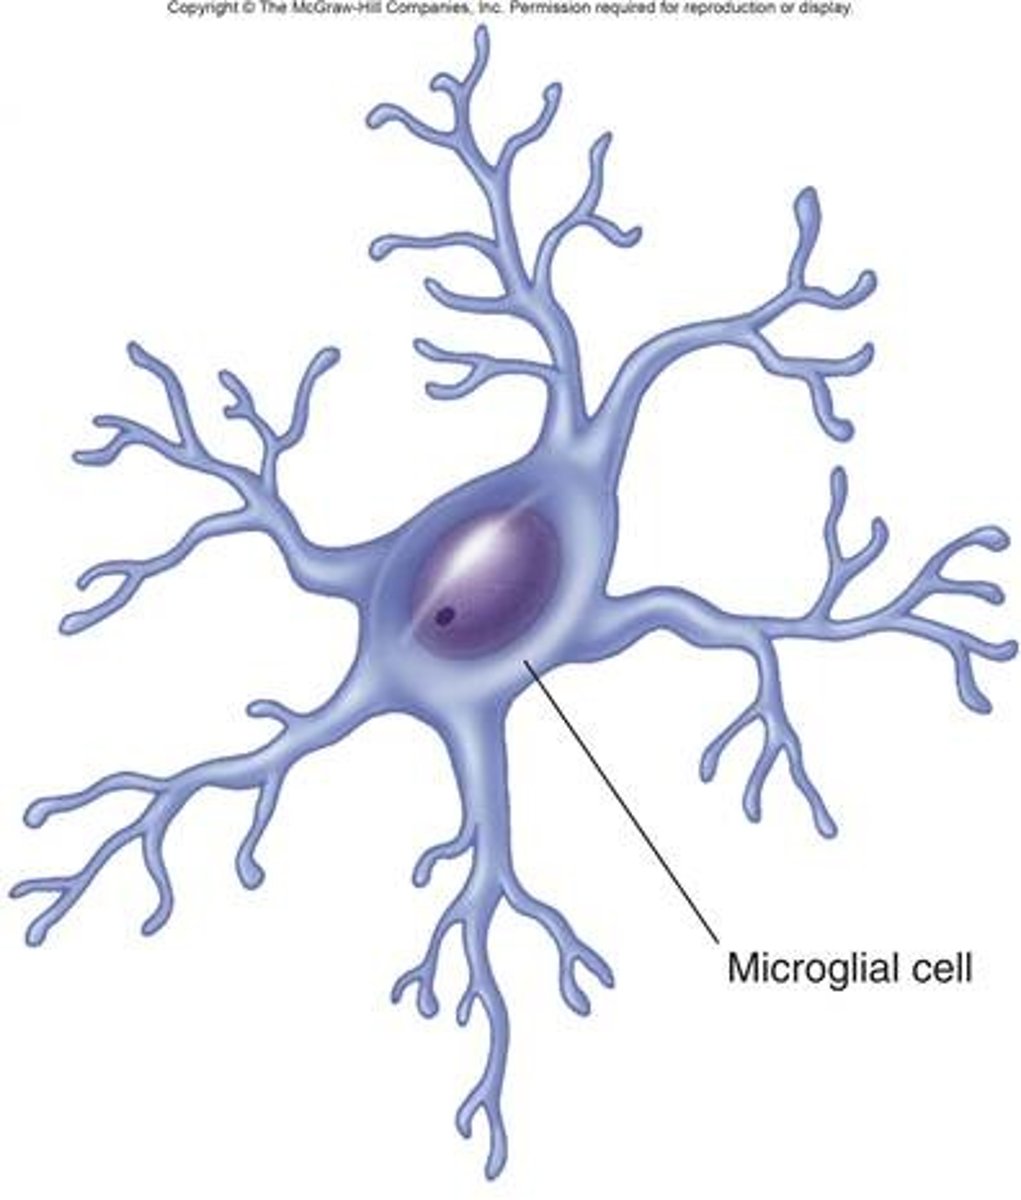 <p>smallest and least abundant in CNS, considered immune cells of the brain</p><p>phagocytize debris from dead/dying cells and invading microorganisms around brain and spinal cord</p>